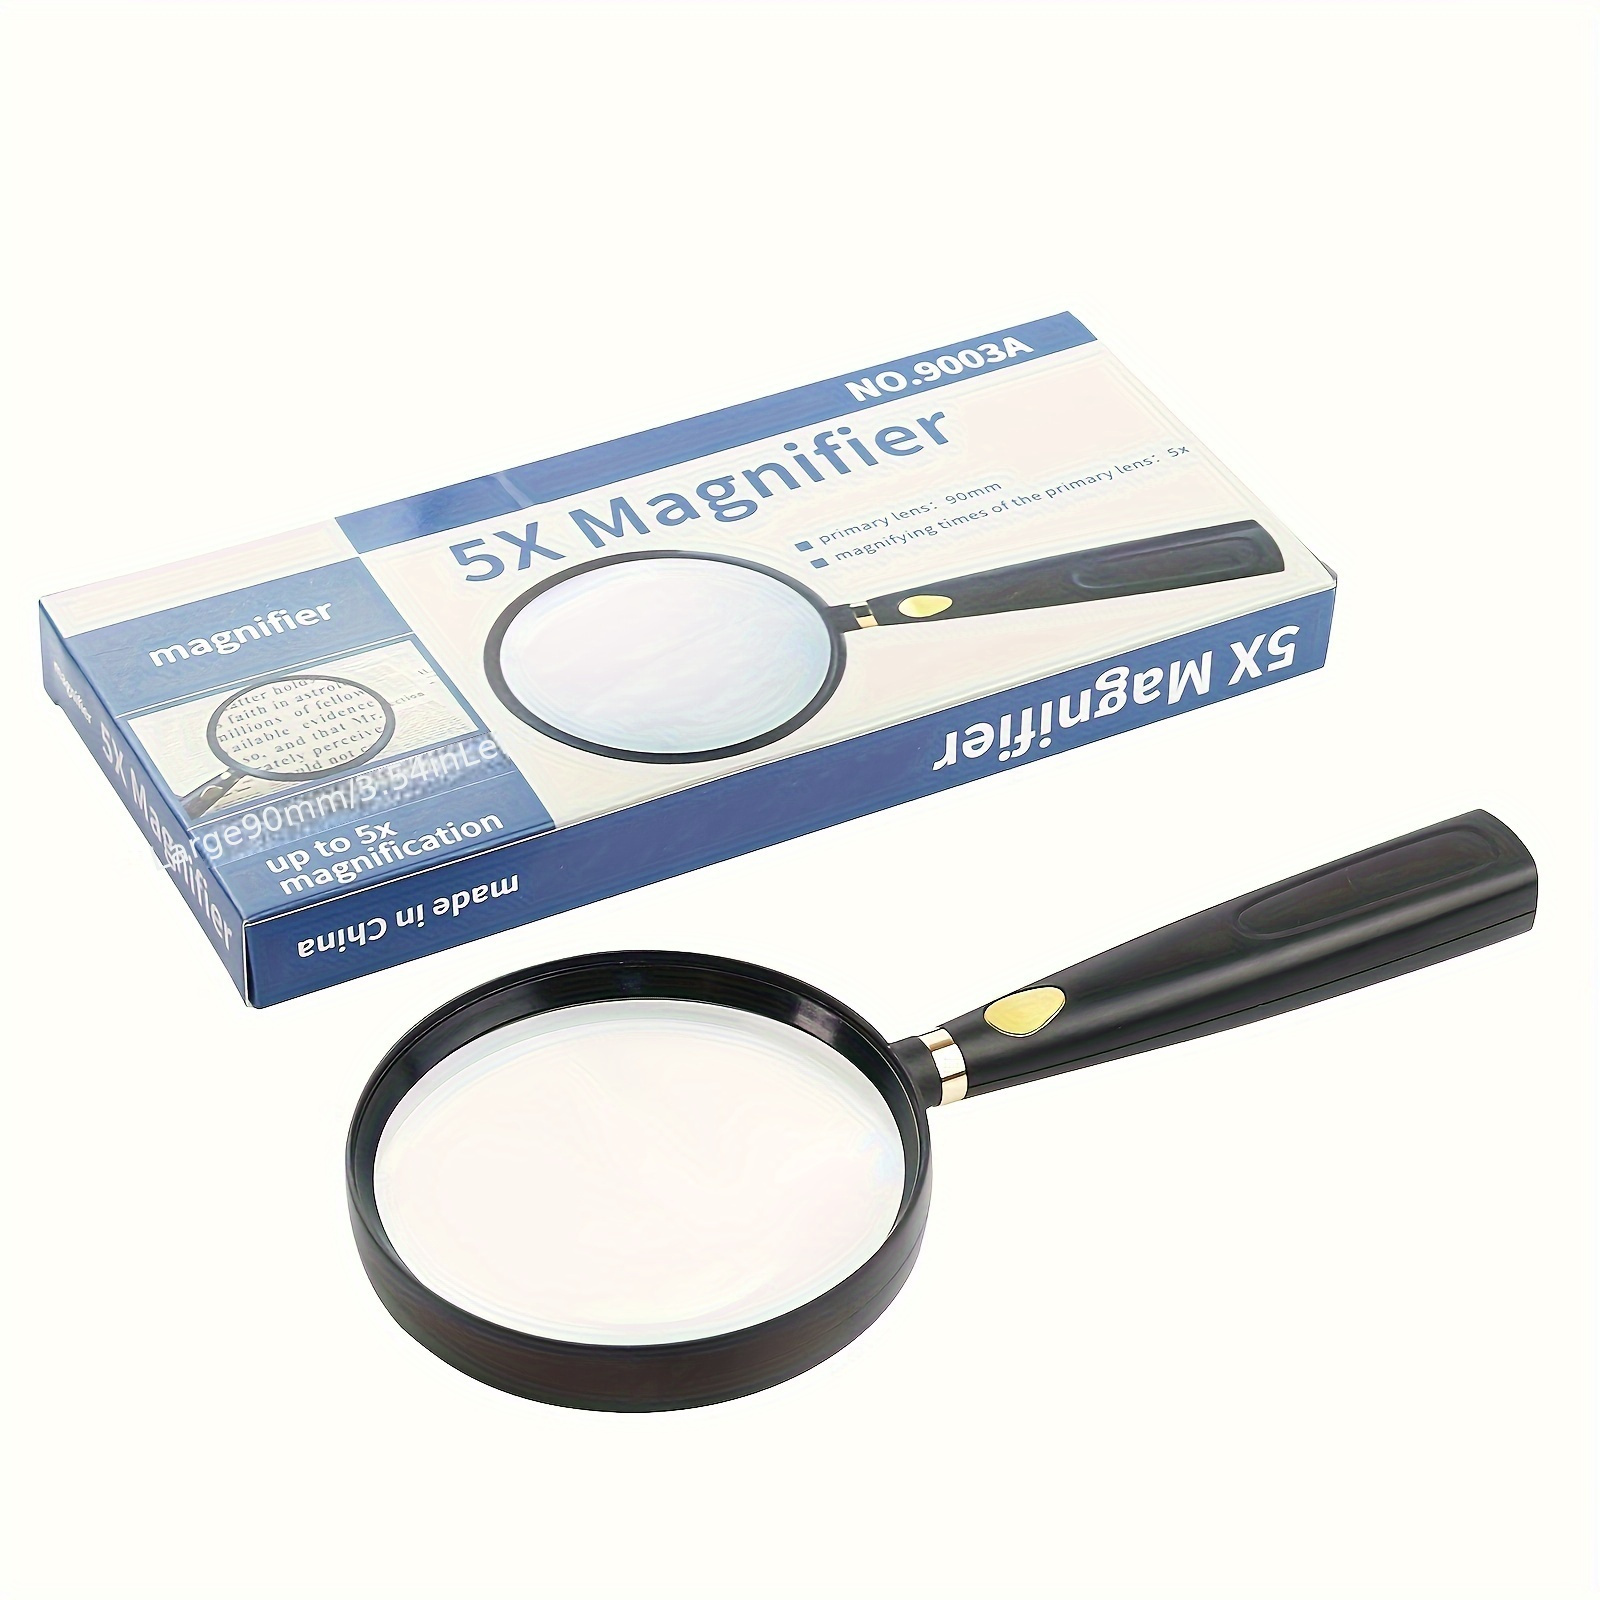 10x Mini Pocket Magnifying Glass Folding Pocket Magnifier Loupe with Rotating Protective Holster Leather Pouch for Reading,Science Class,Hobby (Black)